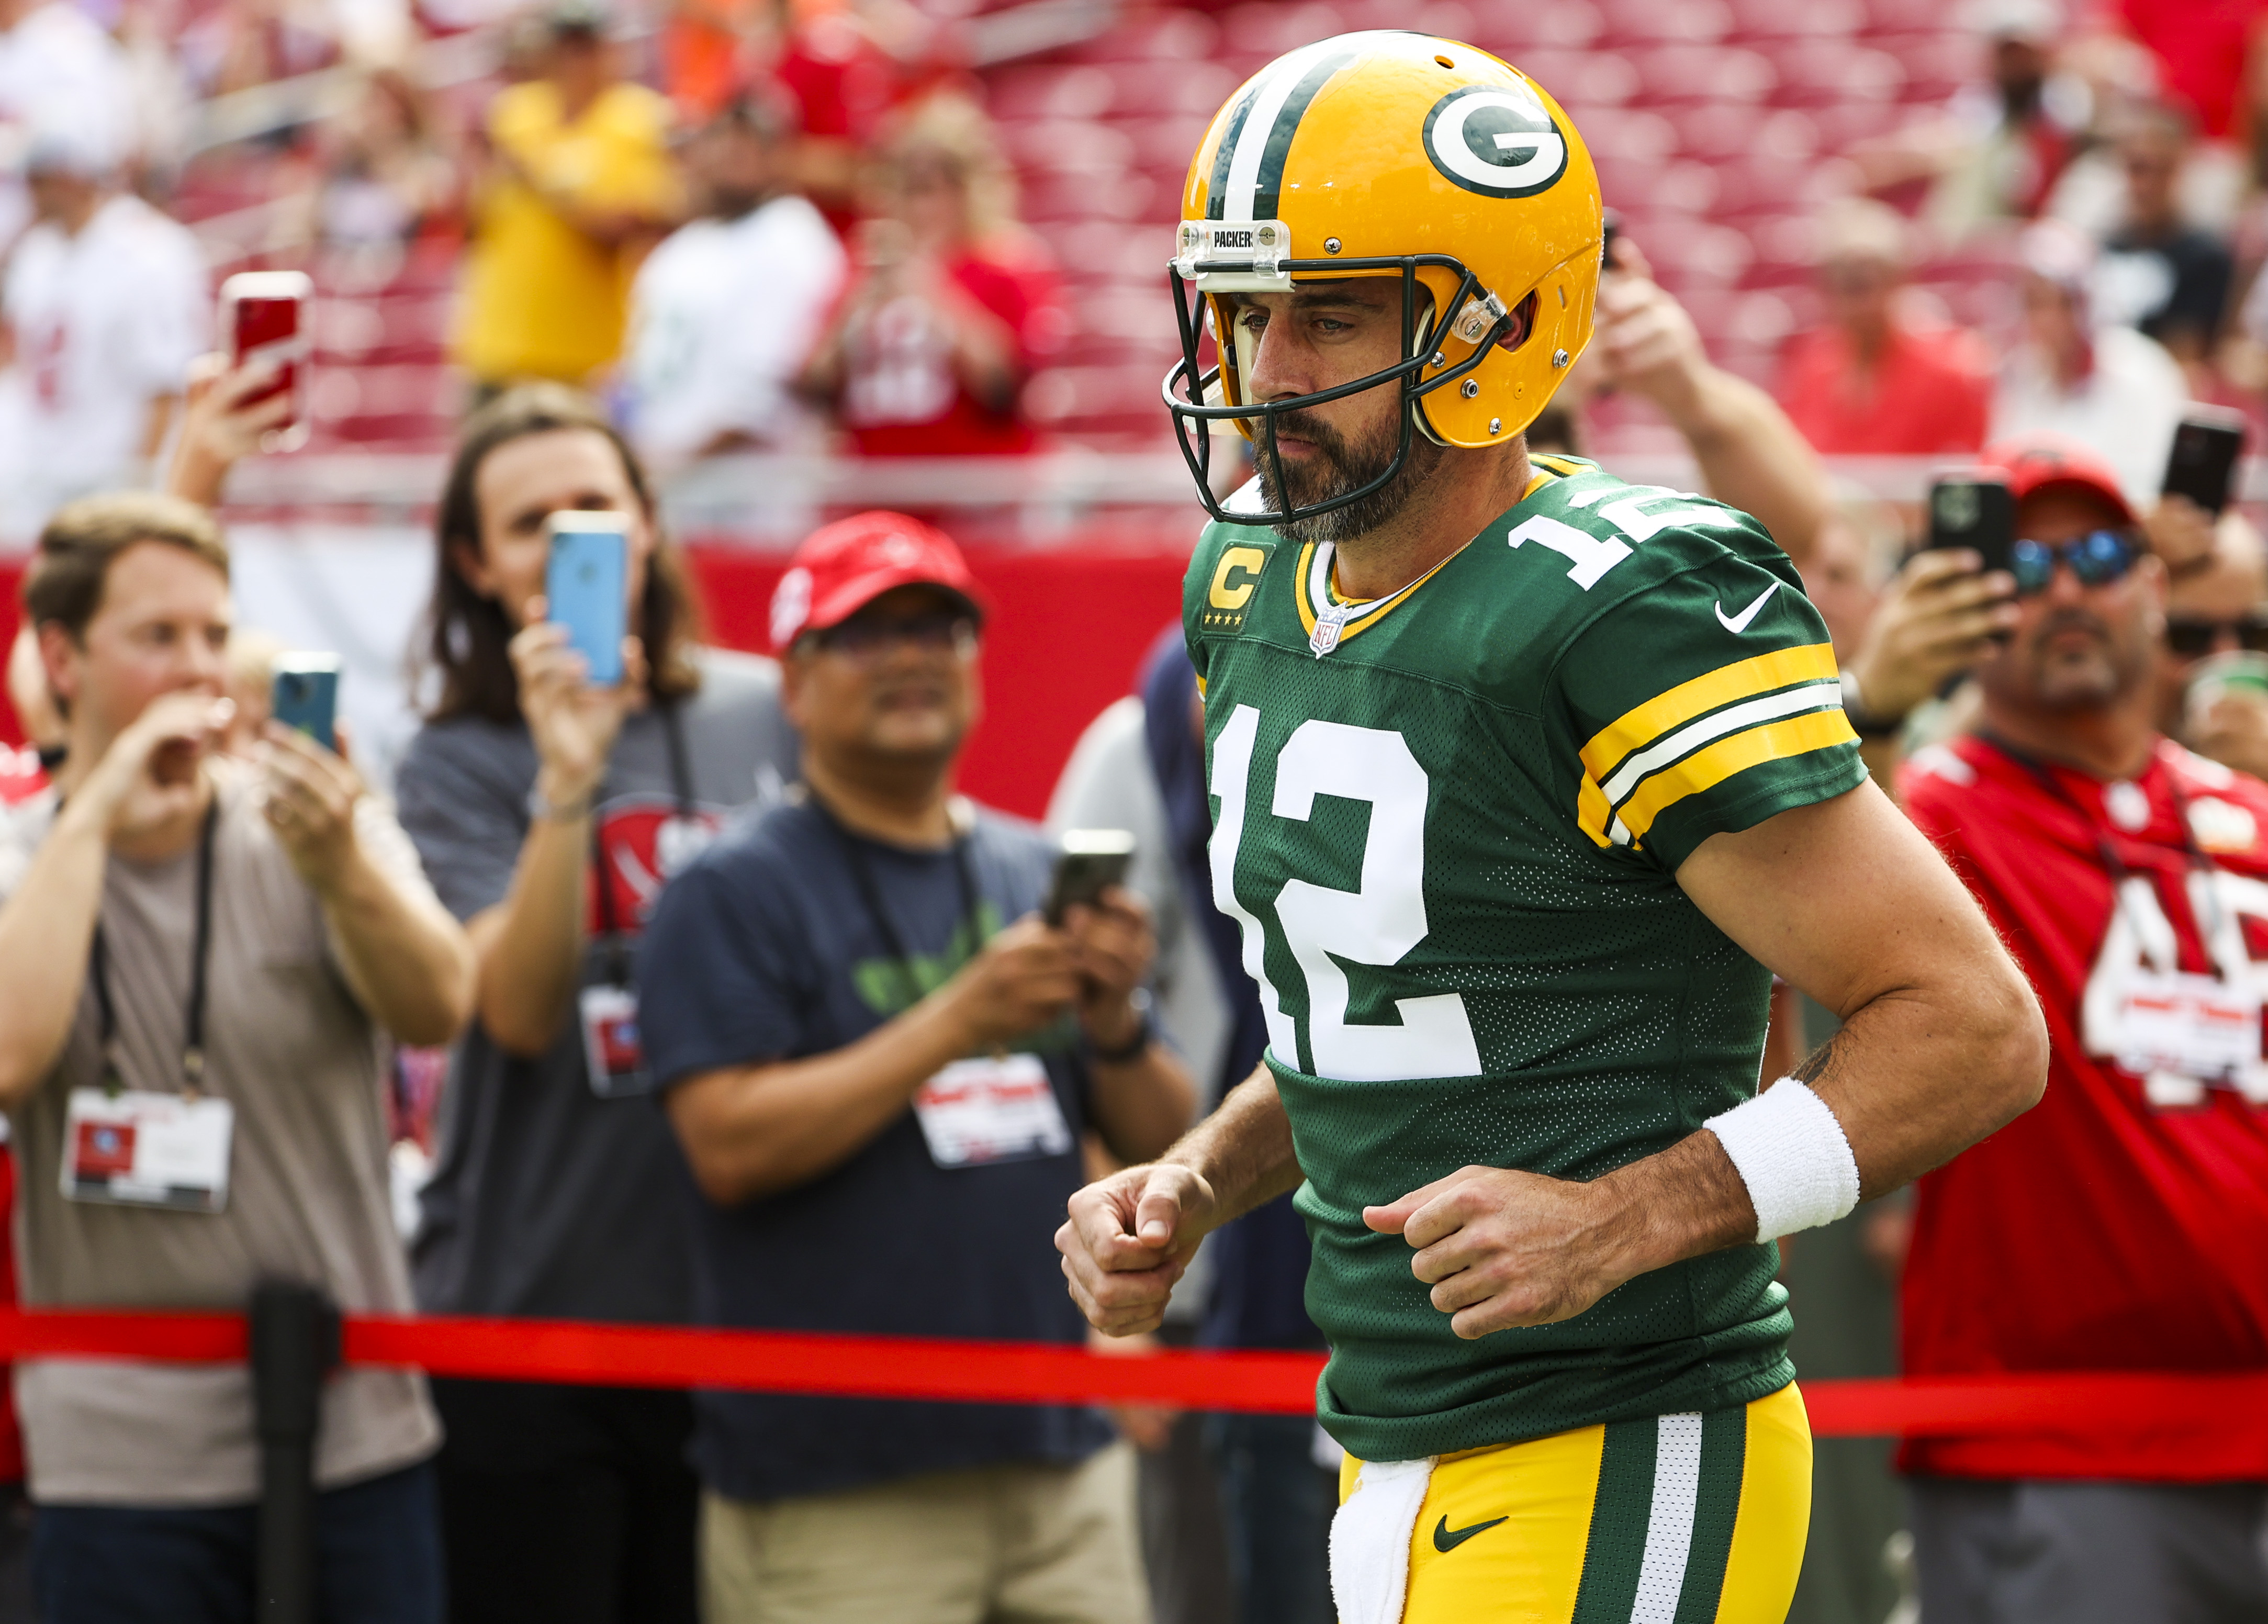 Packers come up short in NFC title game yet again, falling 31-26